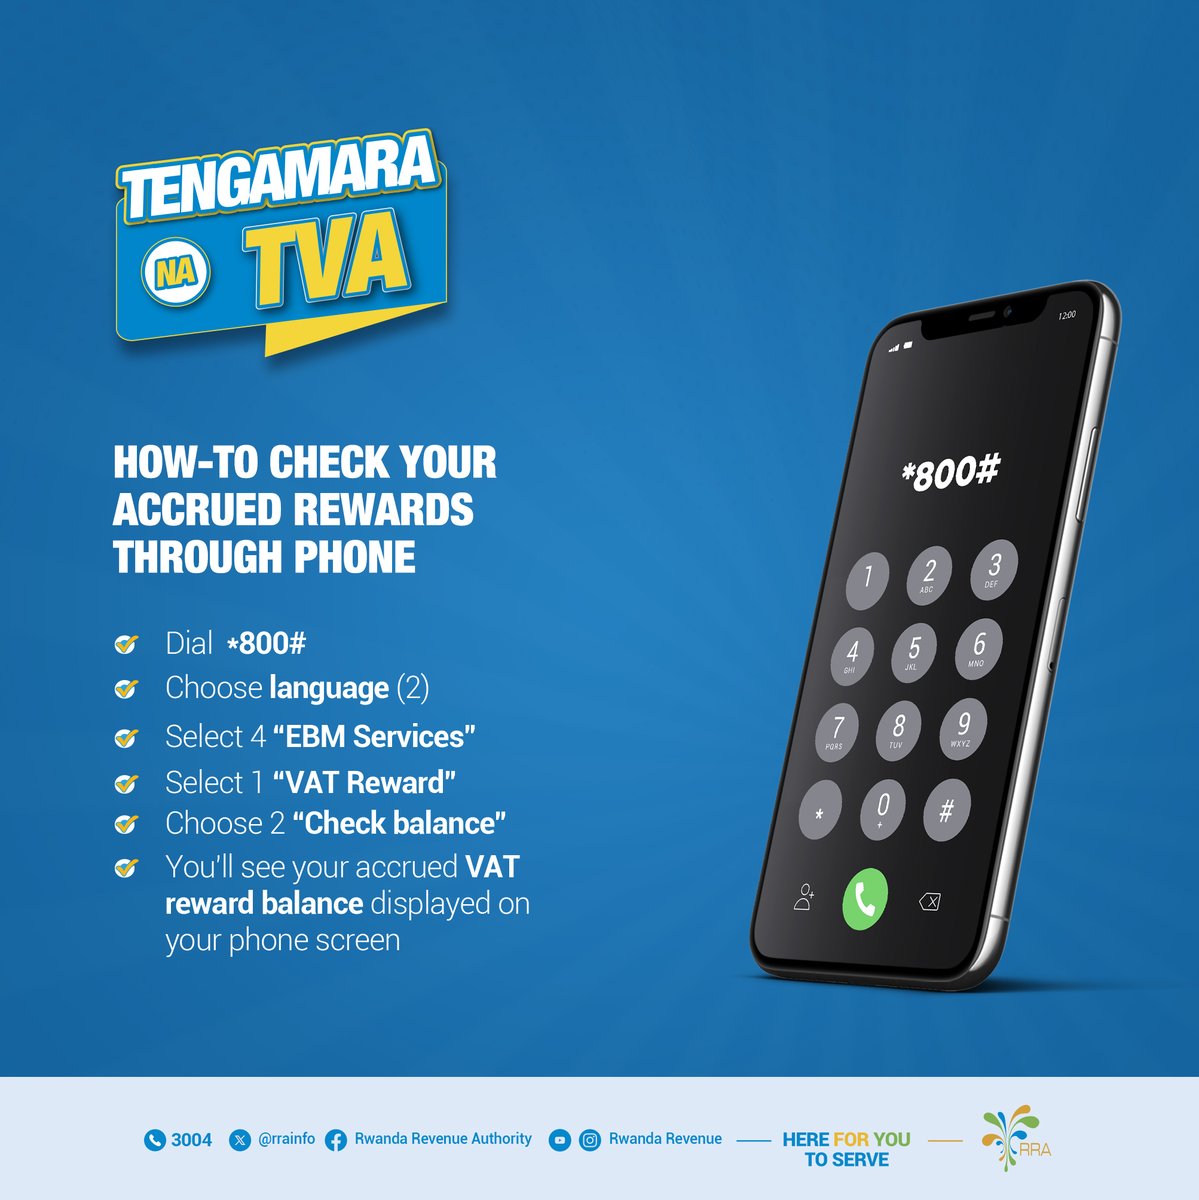 Have you registered for VAT Rewards yet? You can now check your accrued rewards by dialing *800# and following the instructions #Tengamara_na_TVA #SabaFagitireyaEBM